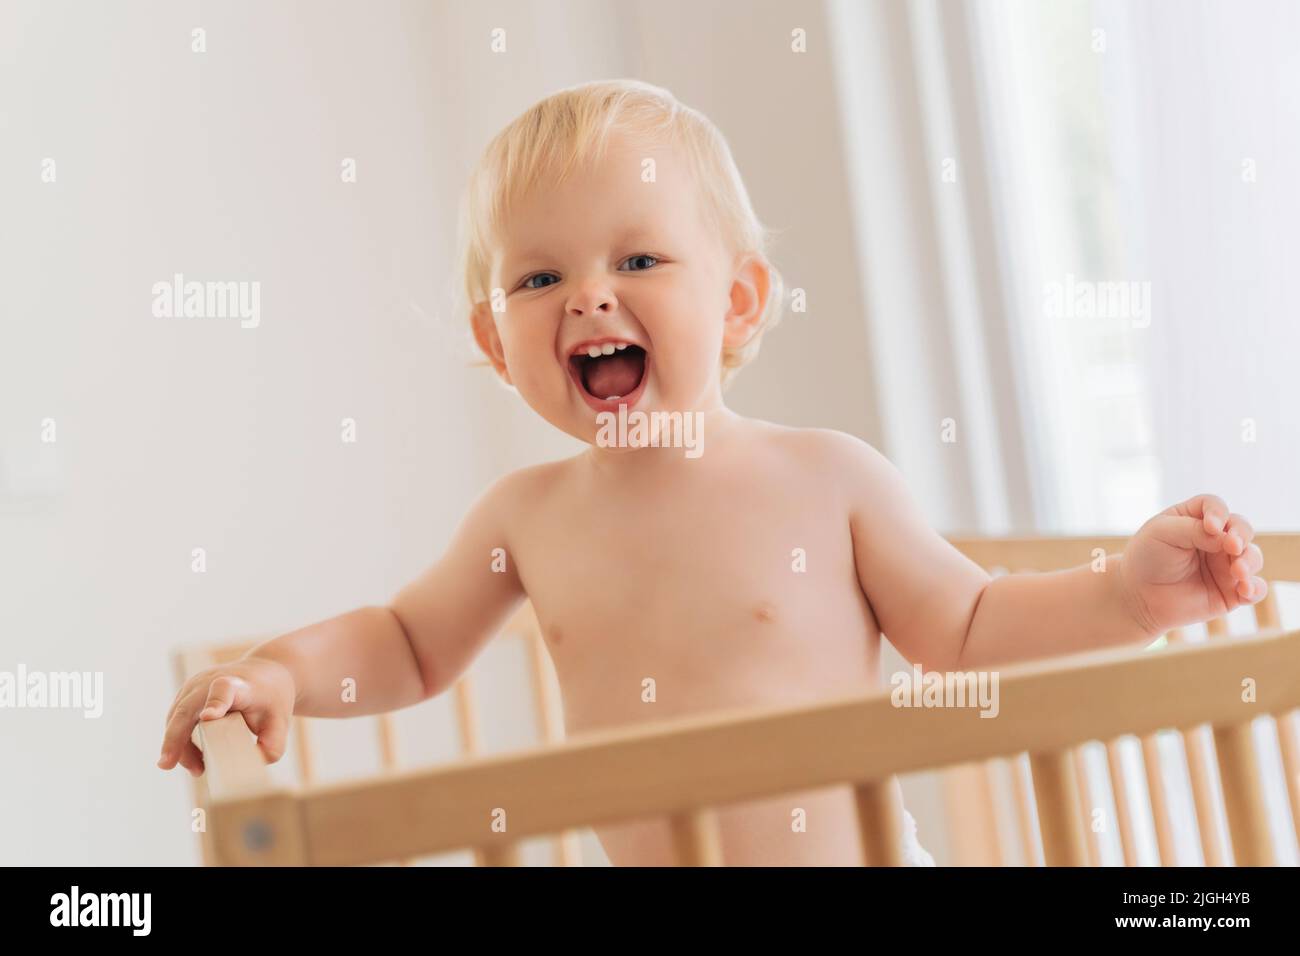 Portrait of funny 11 month old blond baby standing in bed holding onto bumpers shouting with excitement happy to see his father returned home from work. Carefree happy childhood Stock Photo